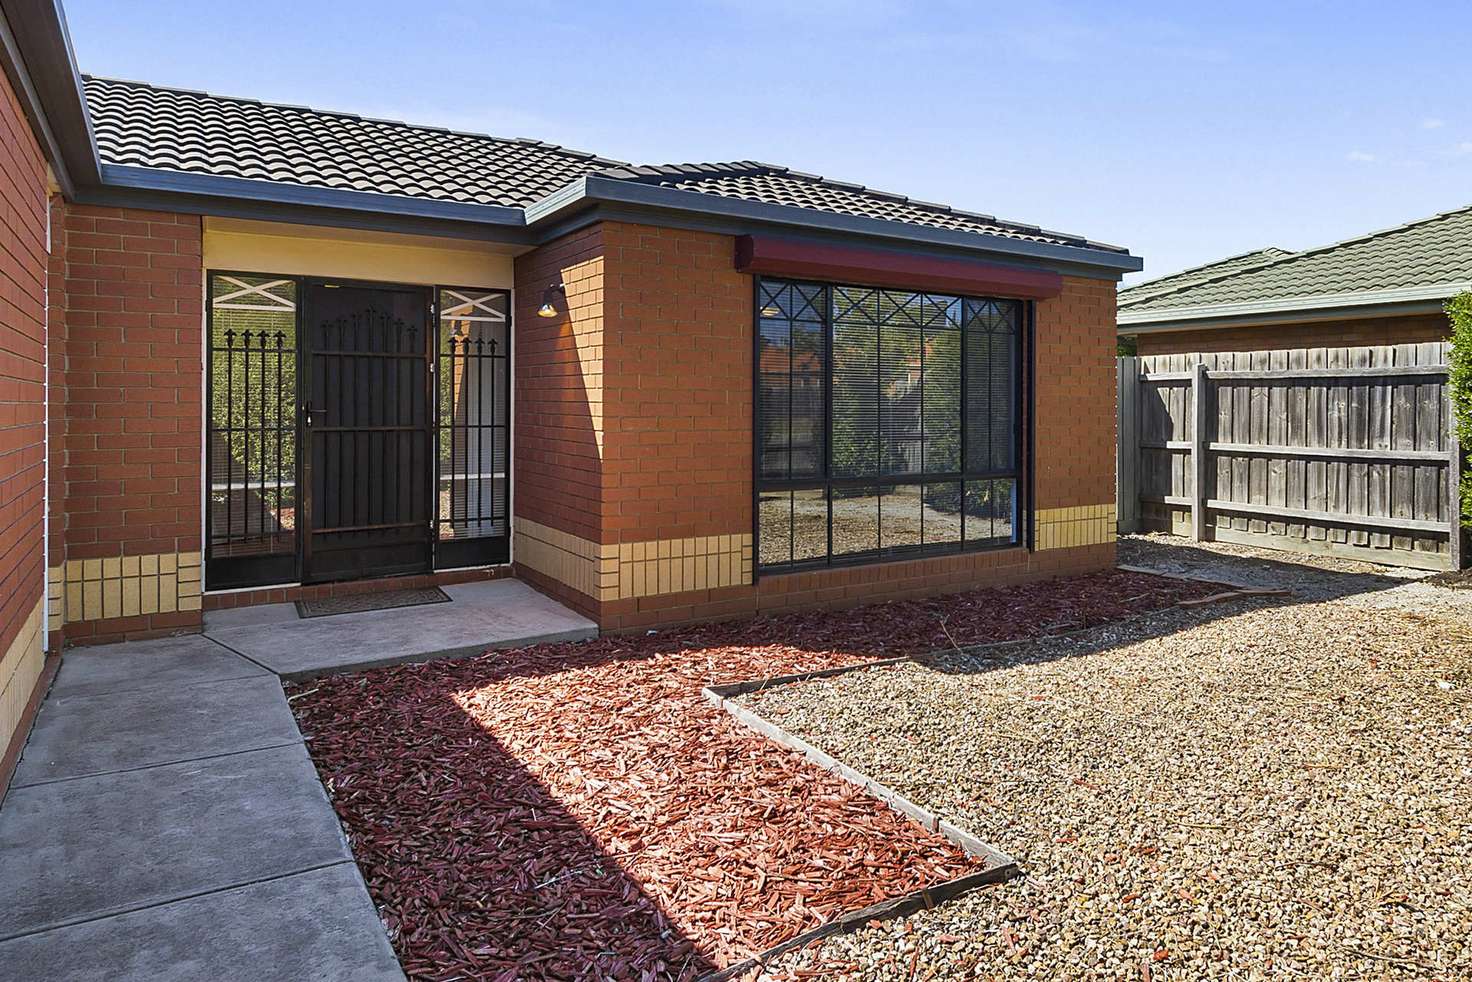 Main view of Homely house listing, 14 Brindalee Way, Hillside VIC 3037